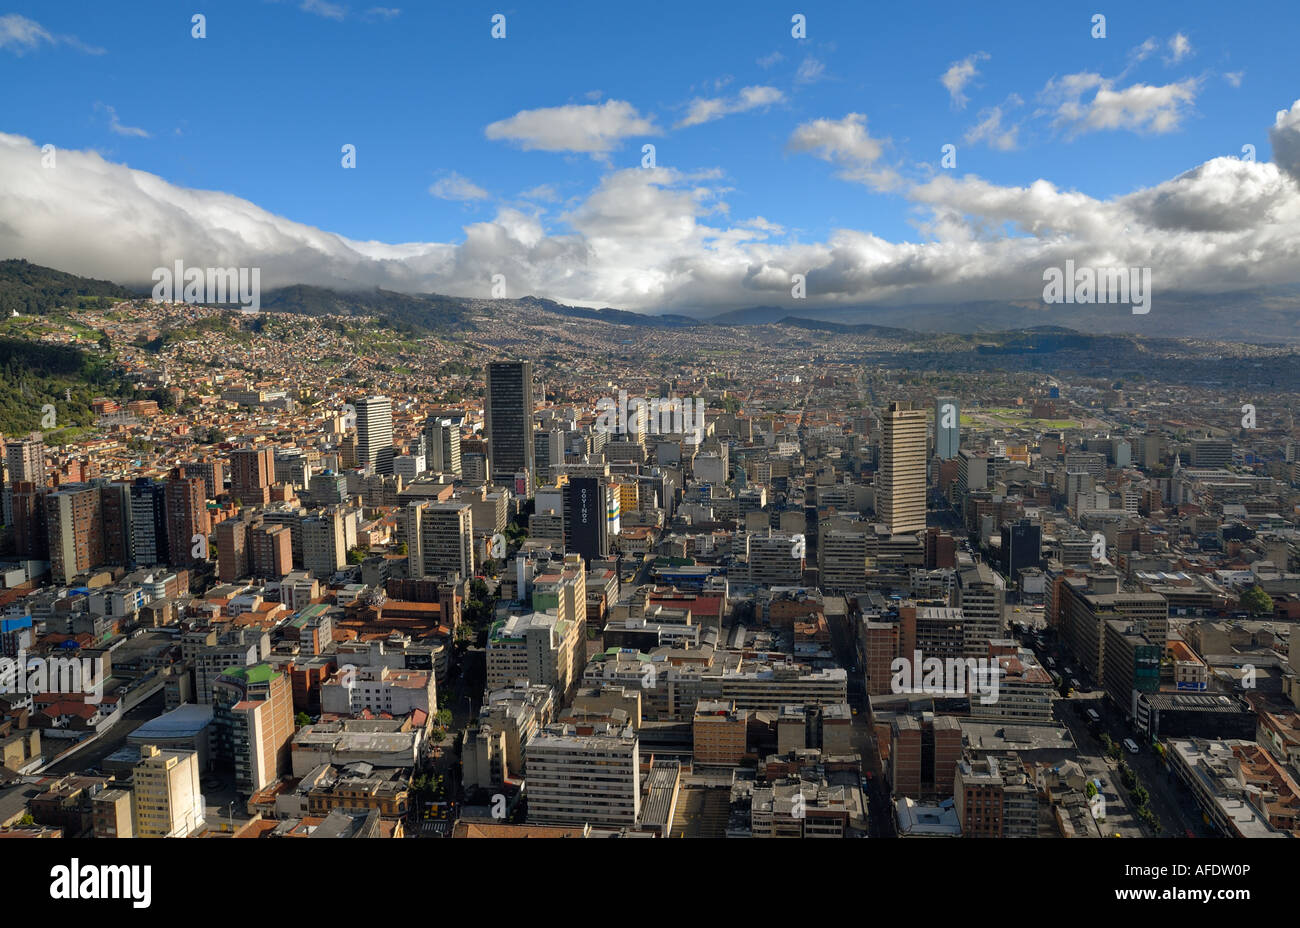 Panoramic view of the center of Bogotá. Stock Photo